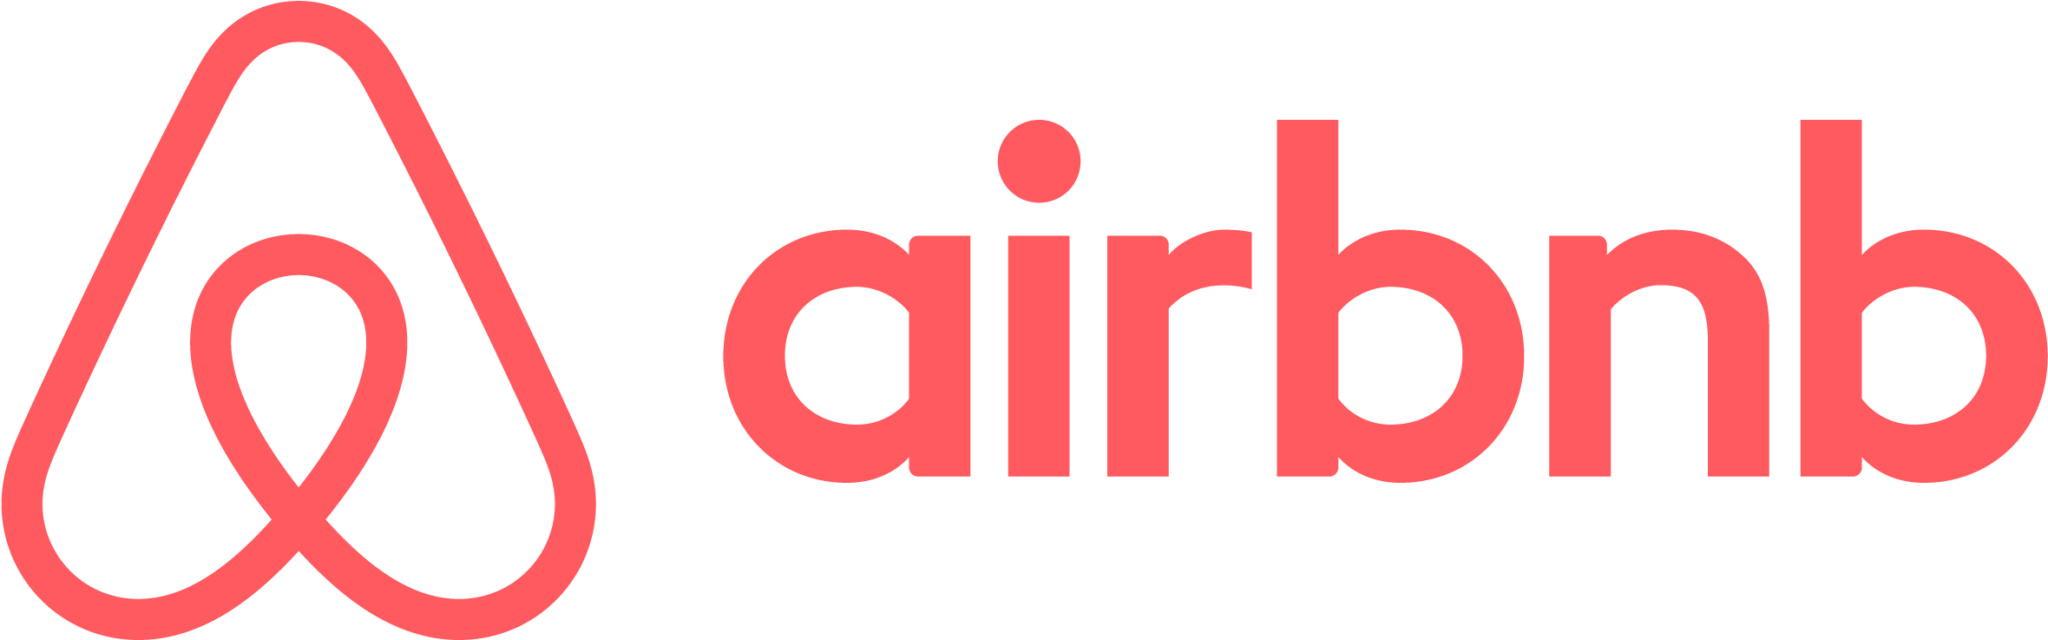 pngfind.com-airbnb-logo-png-133395